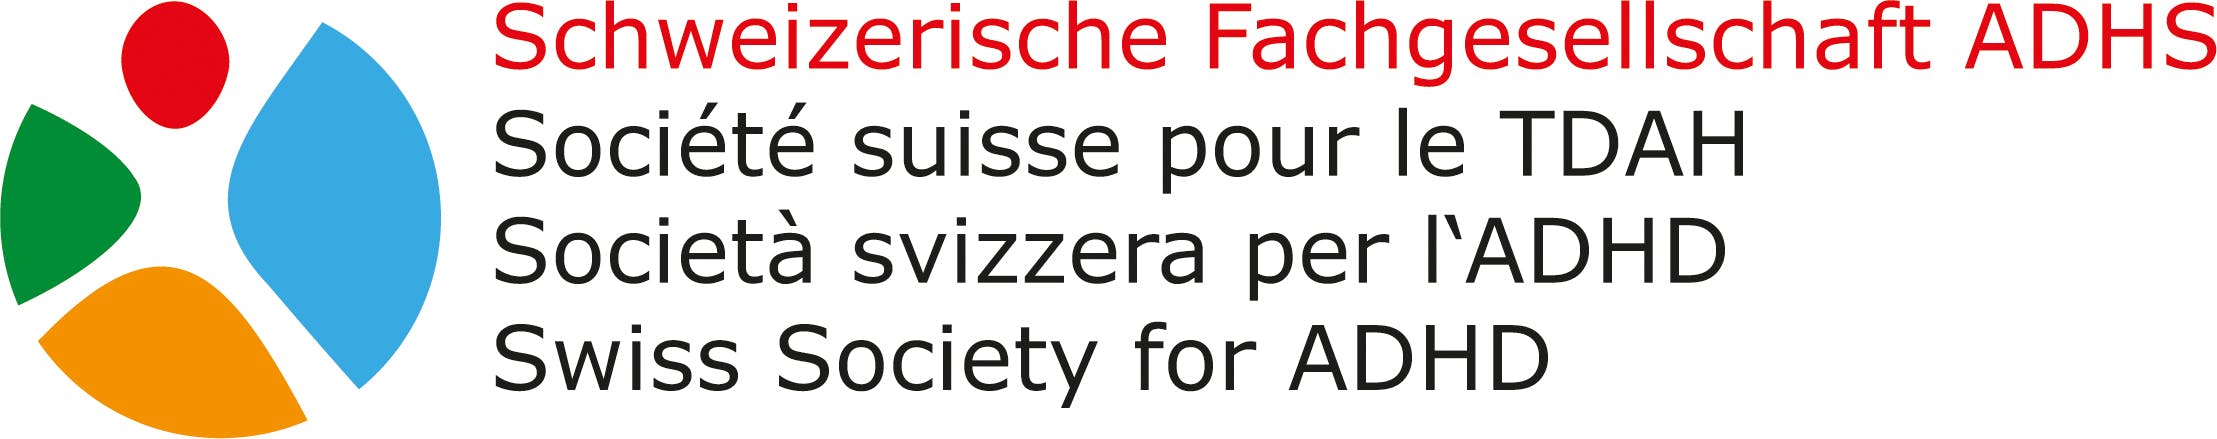 Swiss Society for ADHD on a white background